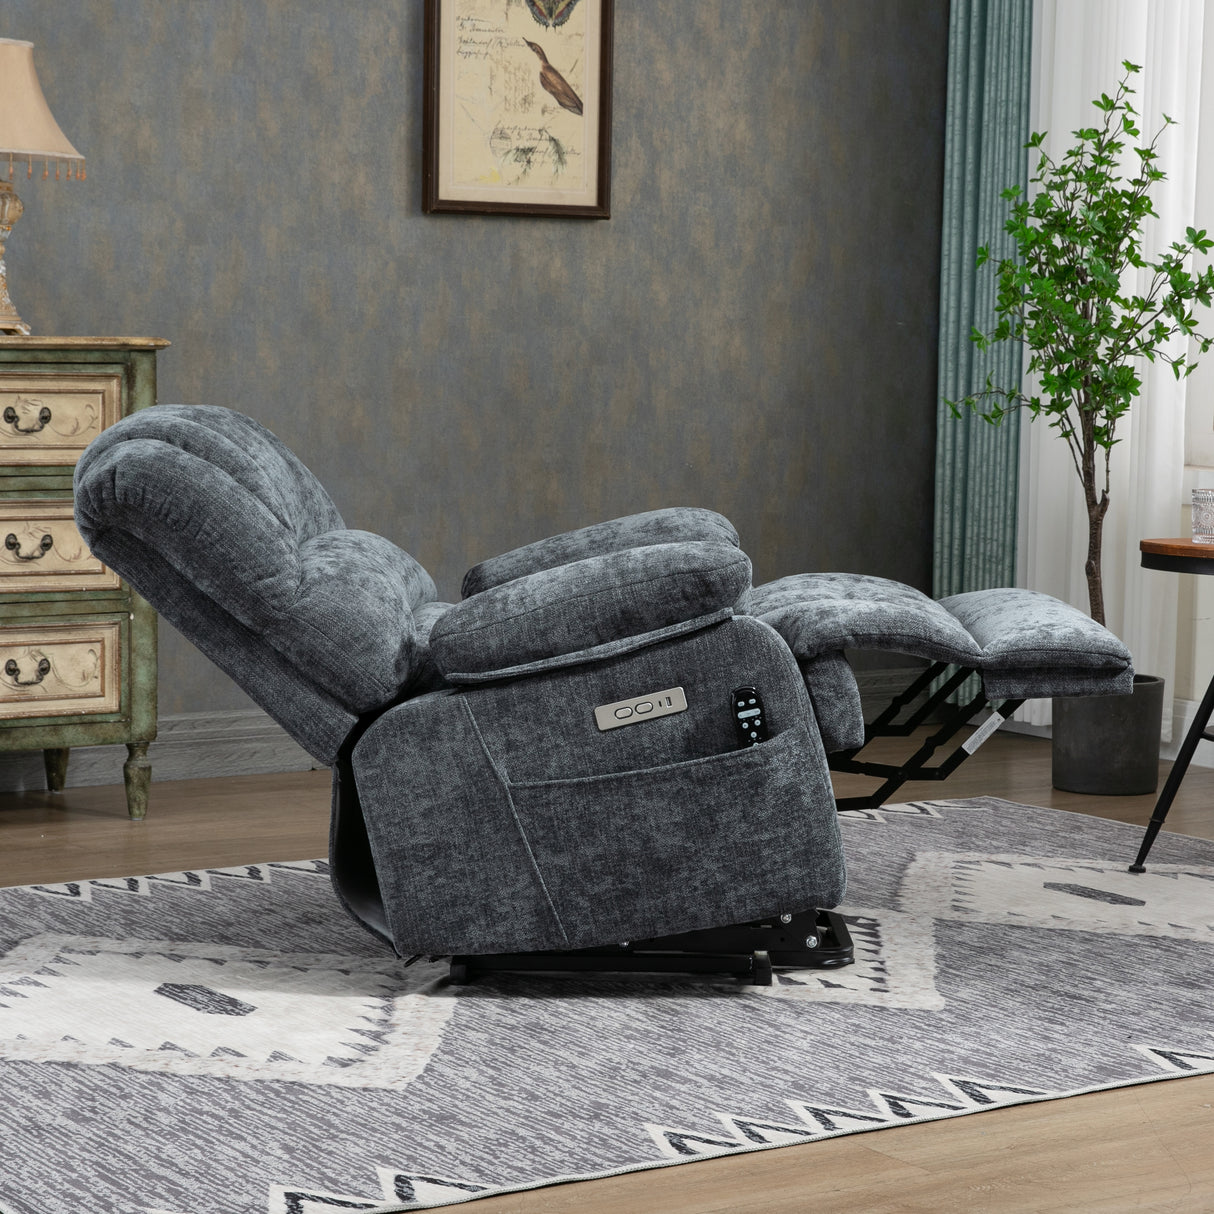 23" Seat Width and High Back Medium Size Blue Chenille Power Lift Recliner Chair with 8-Point Vibration Massage and Lumbar Heating Home Elegance USA